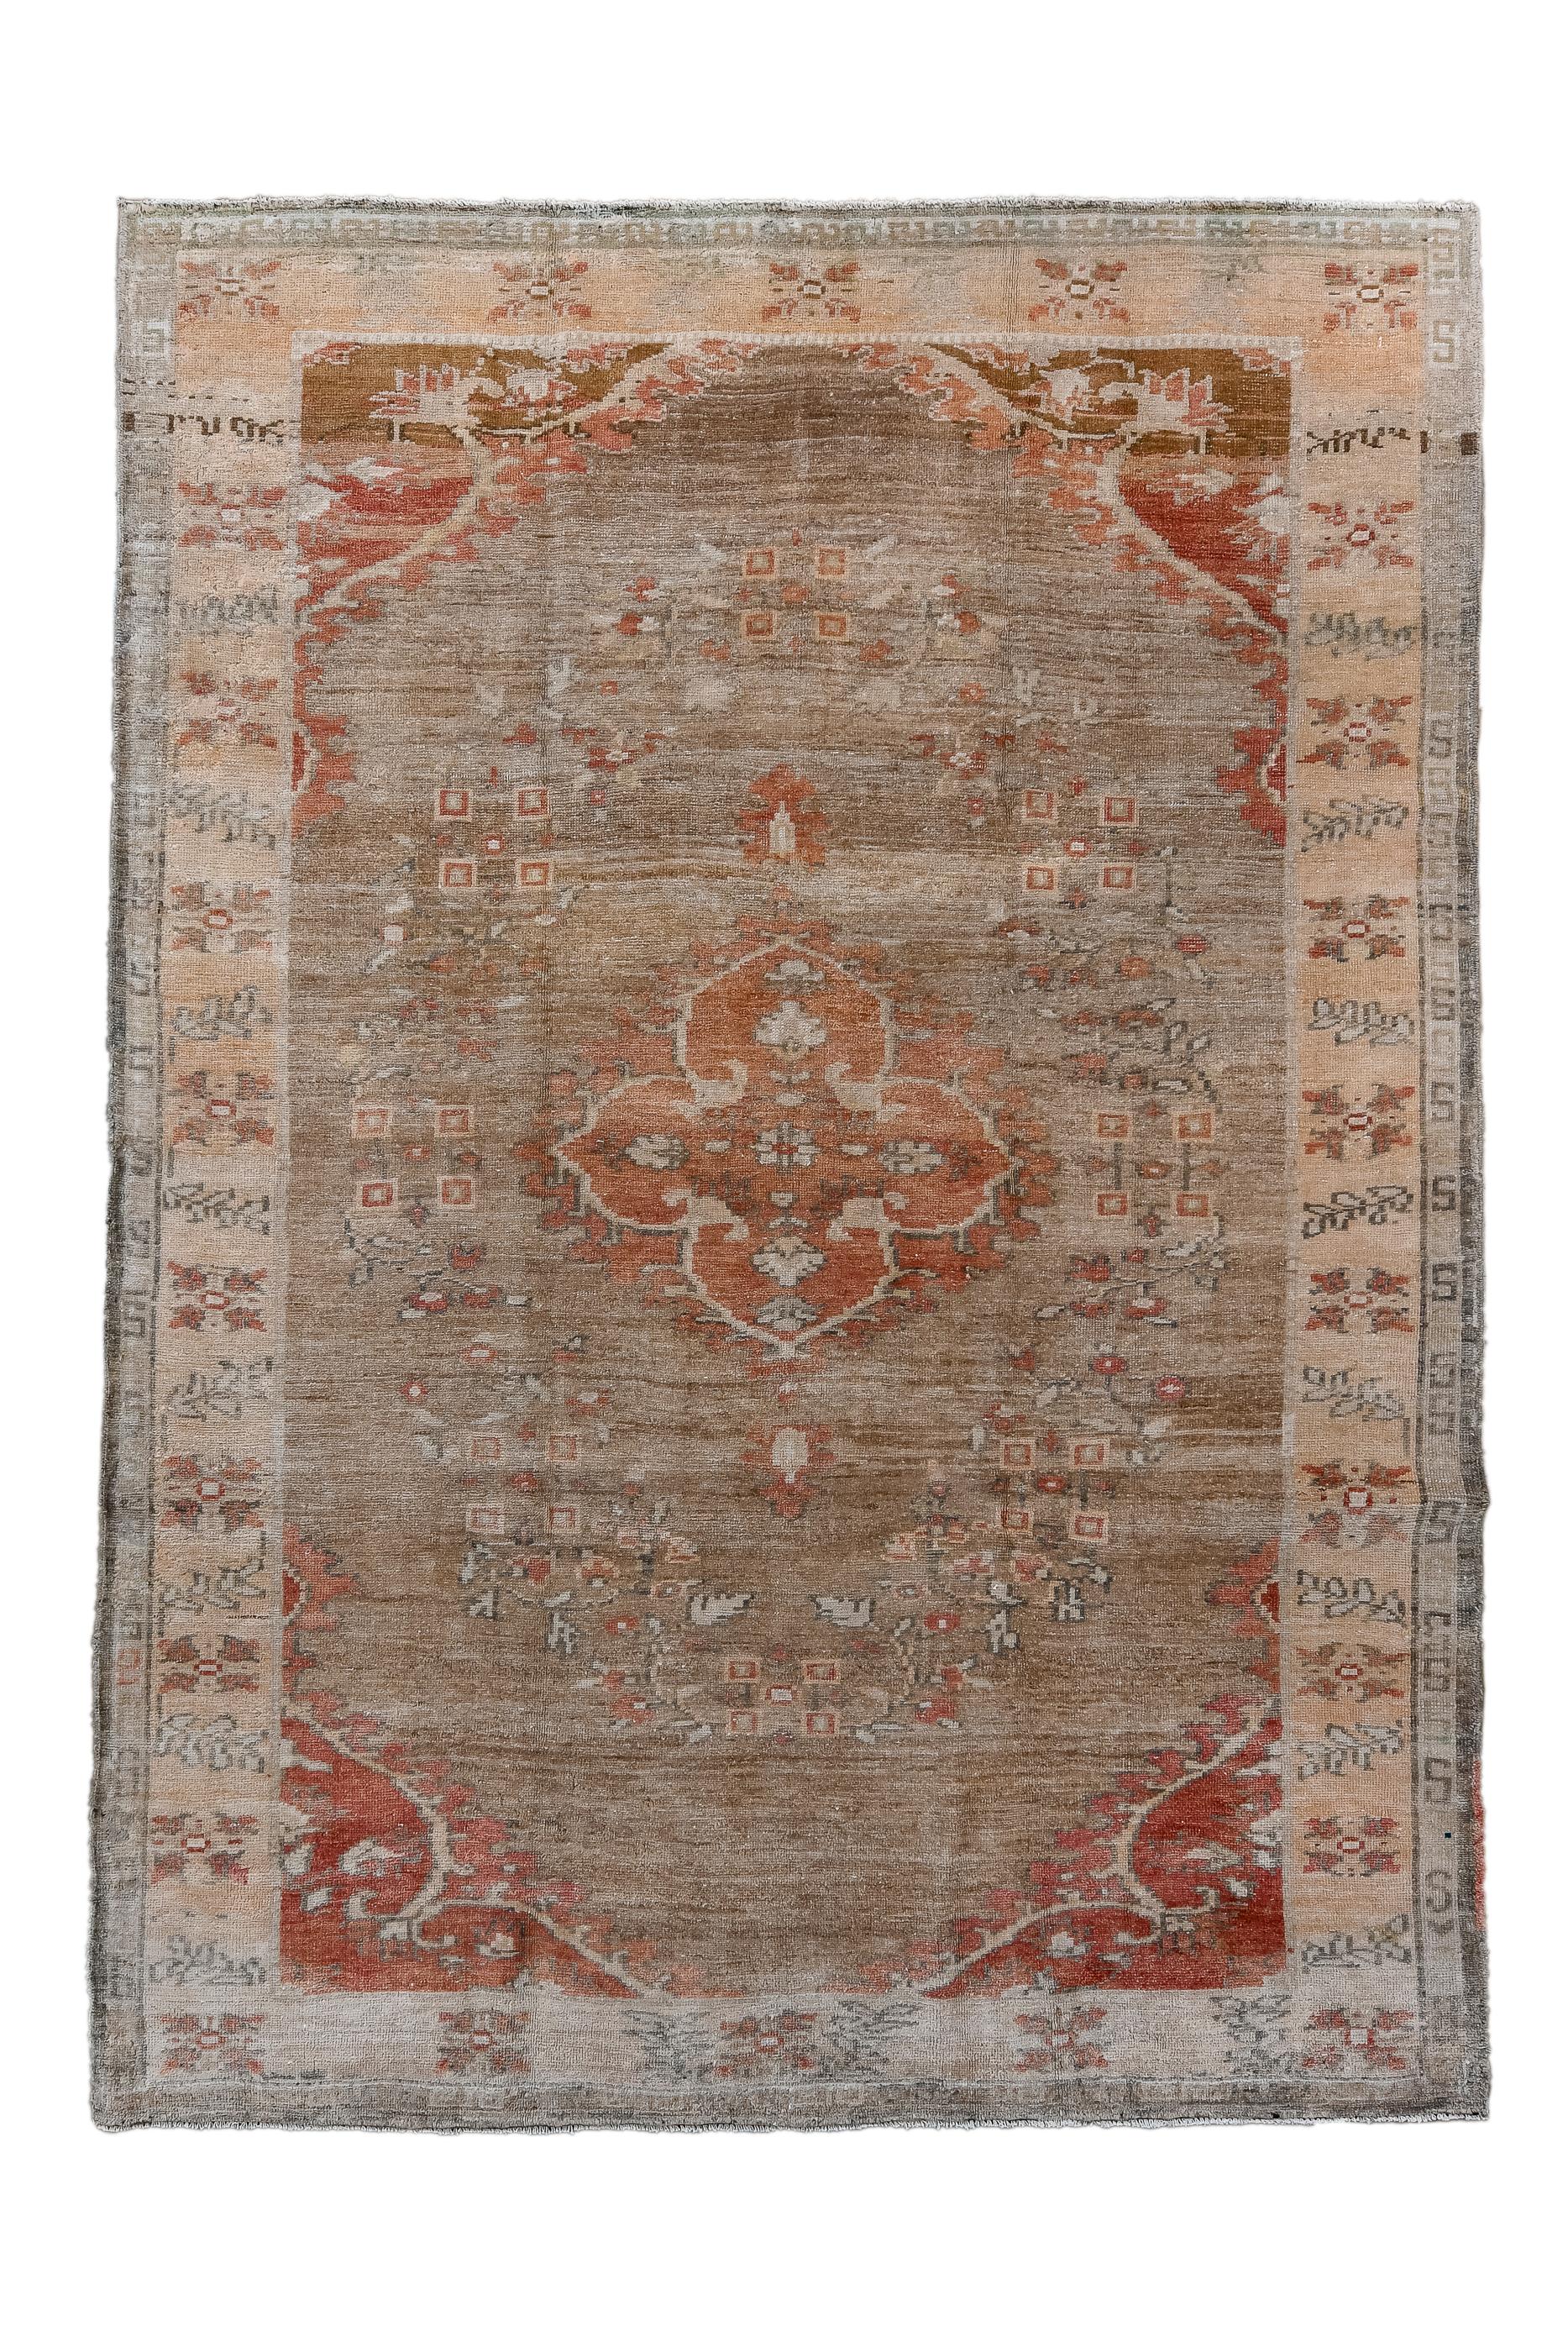 The abrashed terra cotta field shows a rust, four lobe medallion within a floral wreath, and set off by dark red corners. Straw border with leaf sprays and four radiating flower squares. Moderate/coarse weave.

Rug Size
6'10x9'6